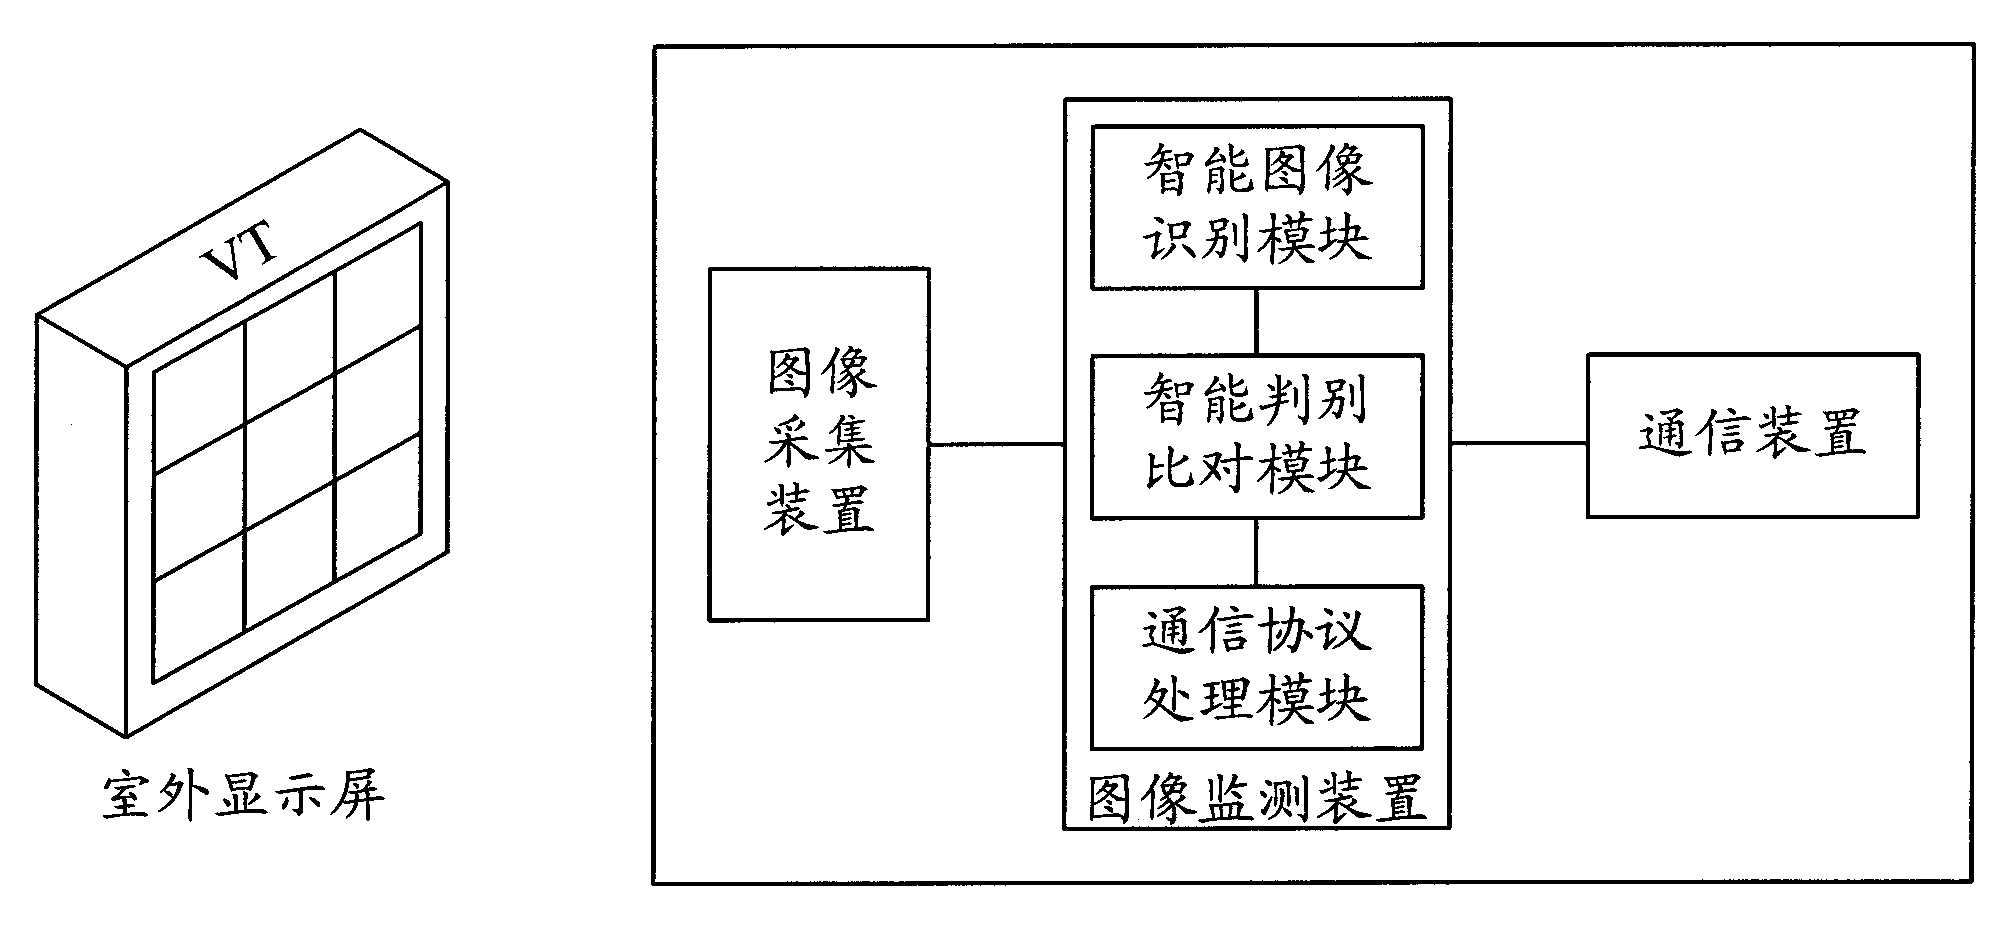 System and method for monitoring outdoor display screen by using video image and/or digital photo